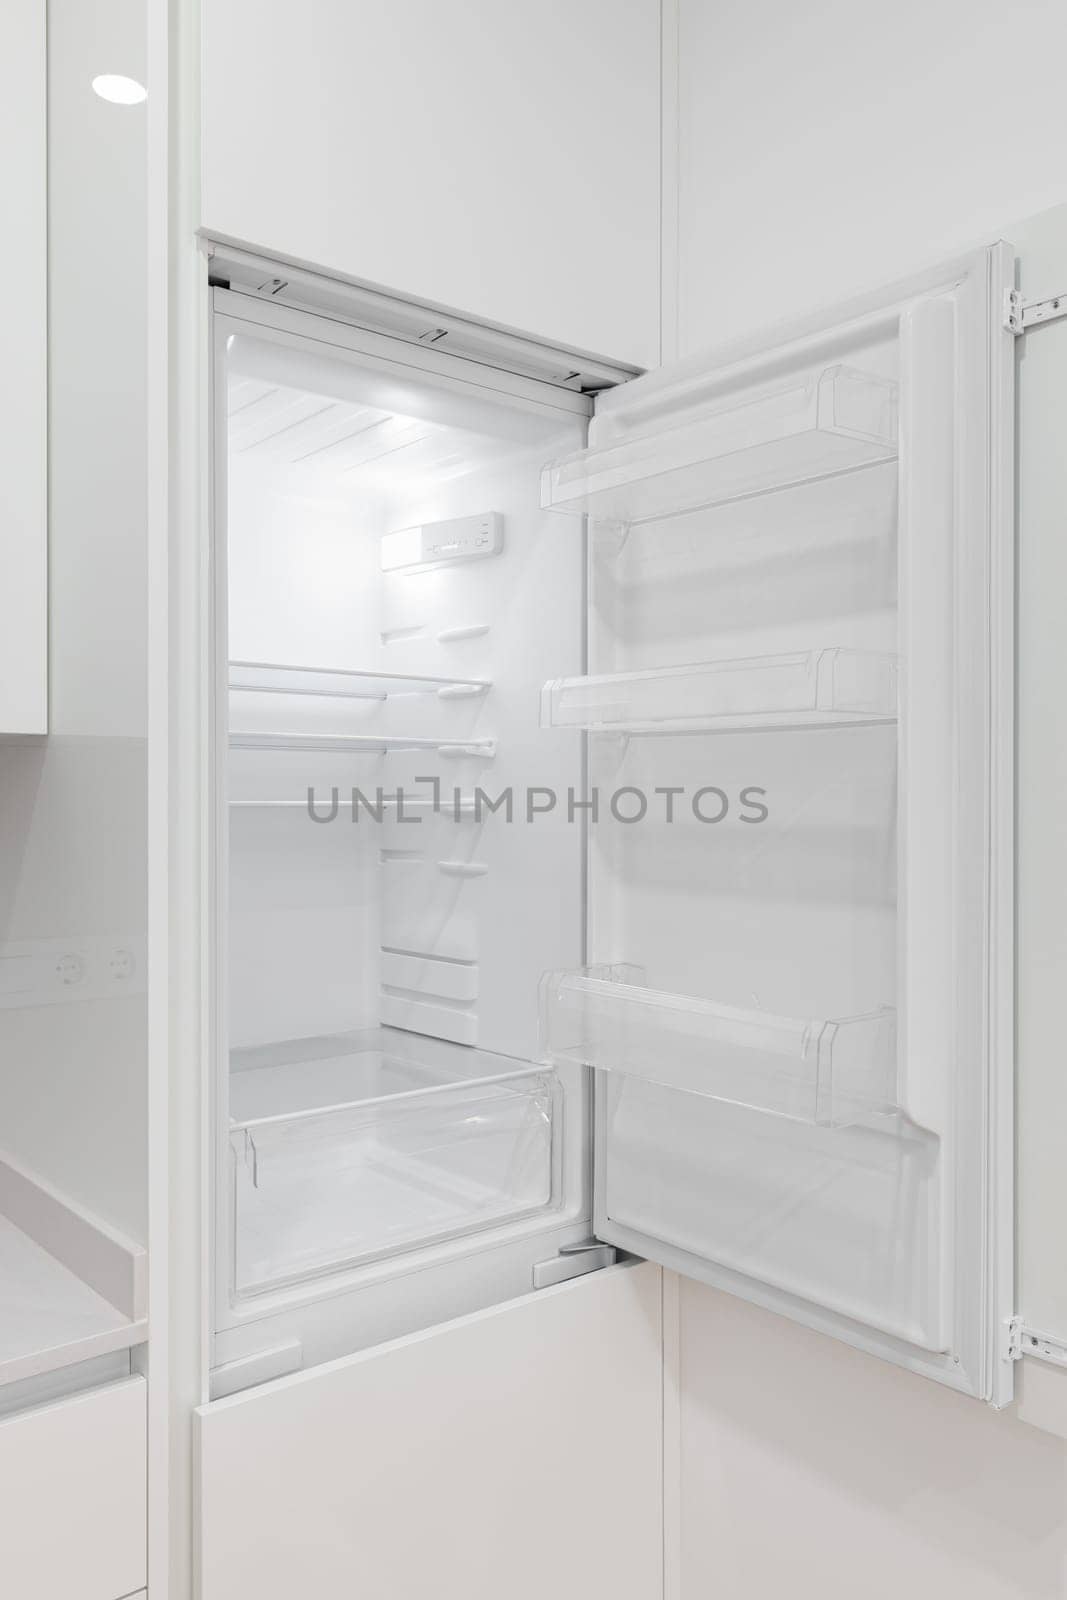 Photo of a white refrigerator with an open door in a modern kitchen by apavlin